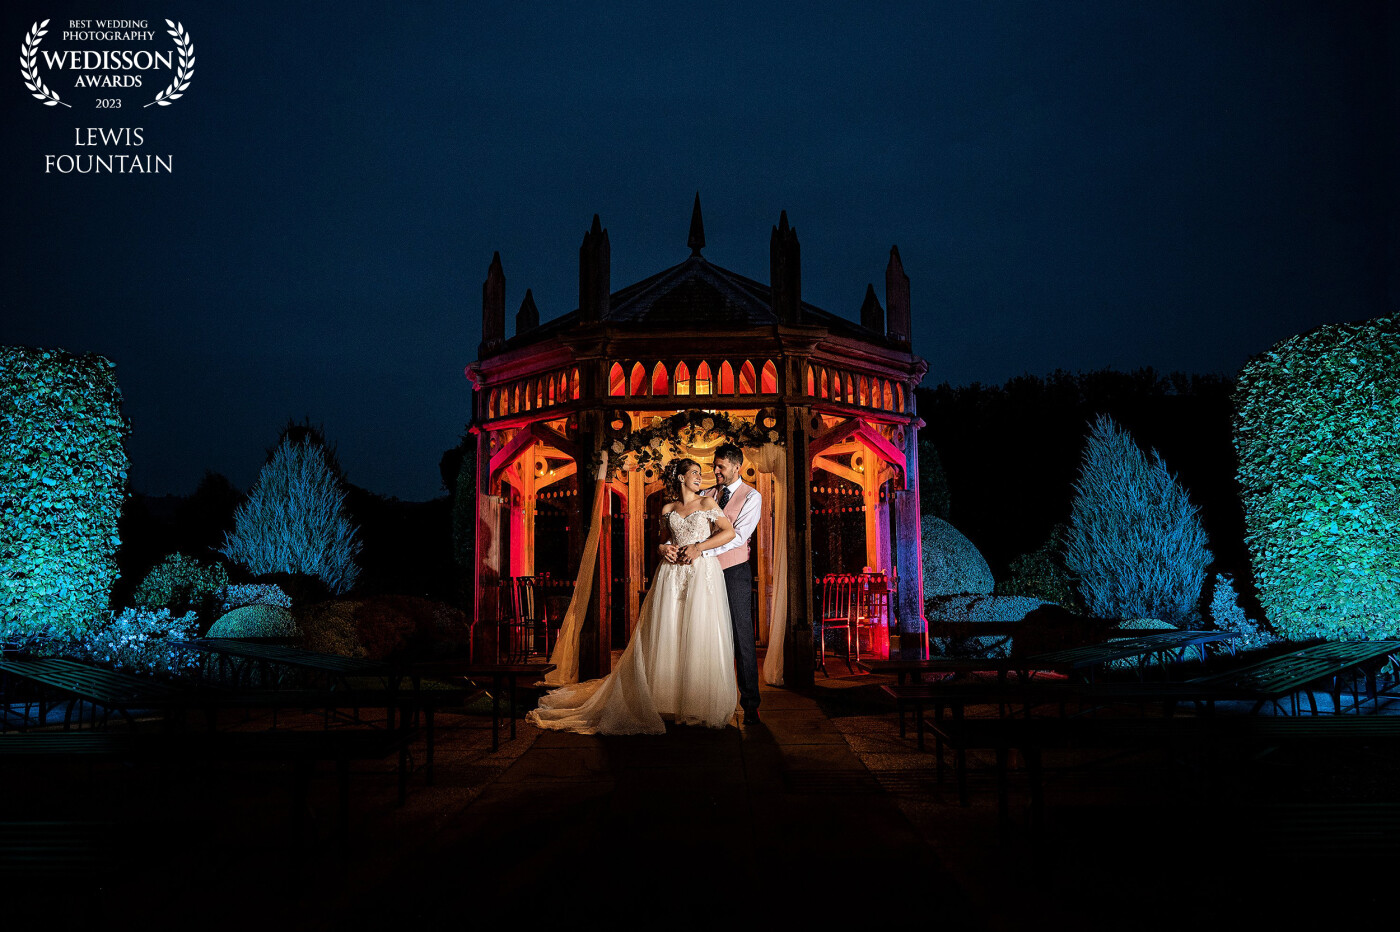 When you don’t get a sunset, and can see the bride & groom are disappointed, fear not we’ll create a shot that they’ll love ❤️ <br />
The Old Halls pavilion is used a lot by photographers, but not many use a 5 light set up to give you the drama, something different from the norm!